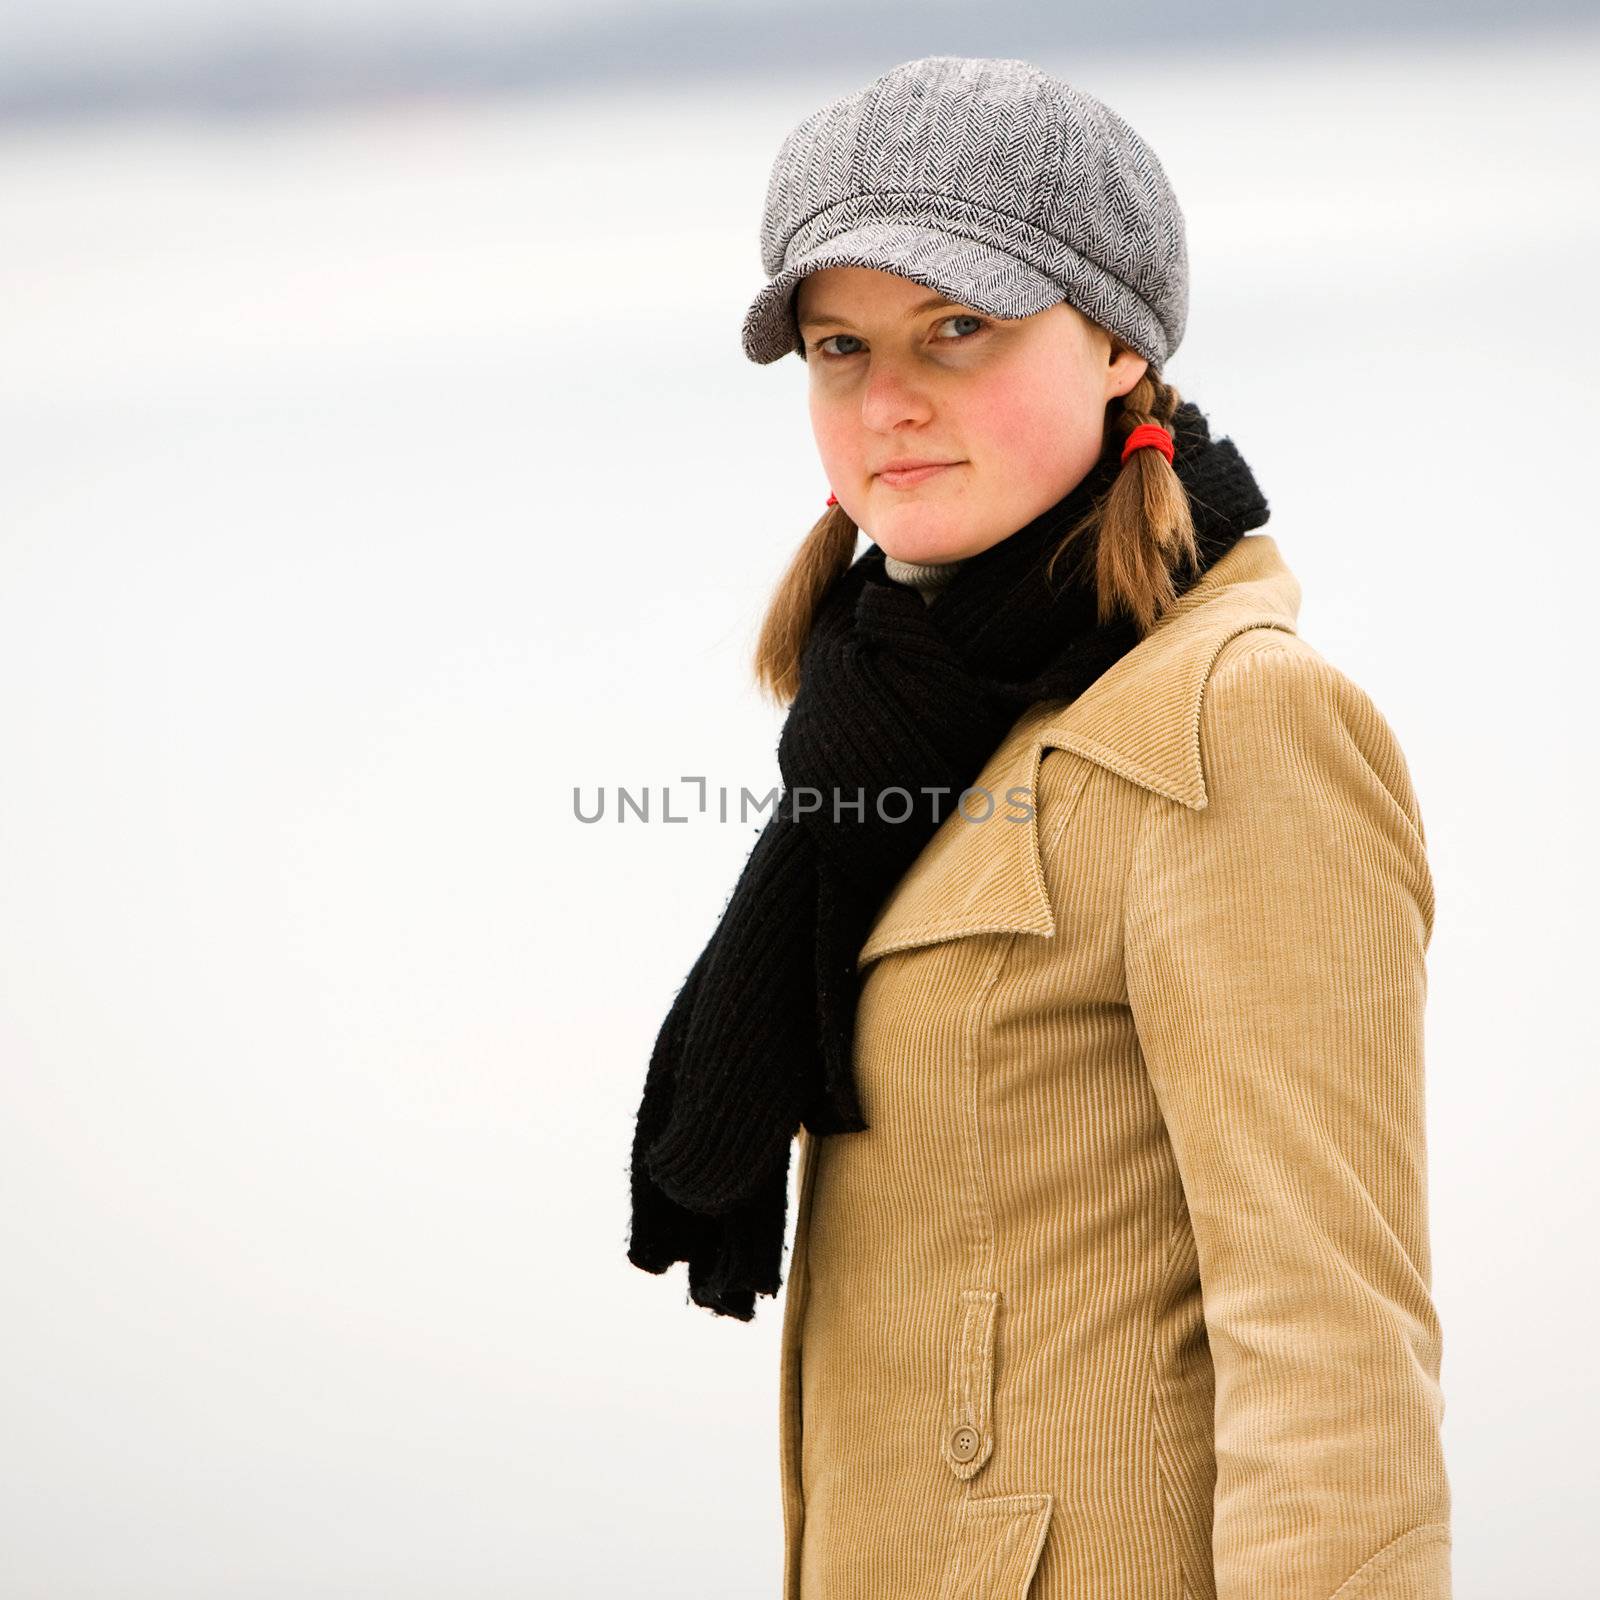 A young woman standing by the ocean in winter